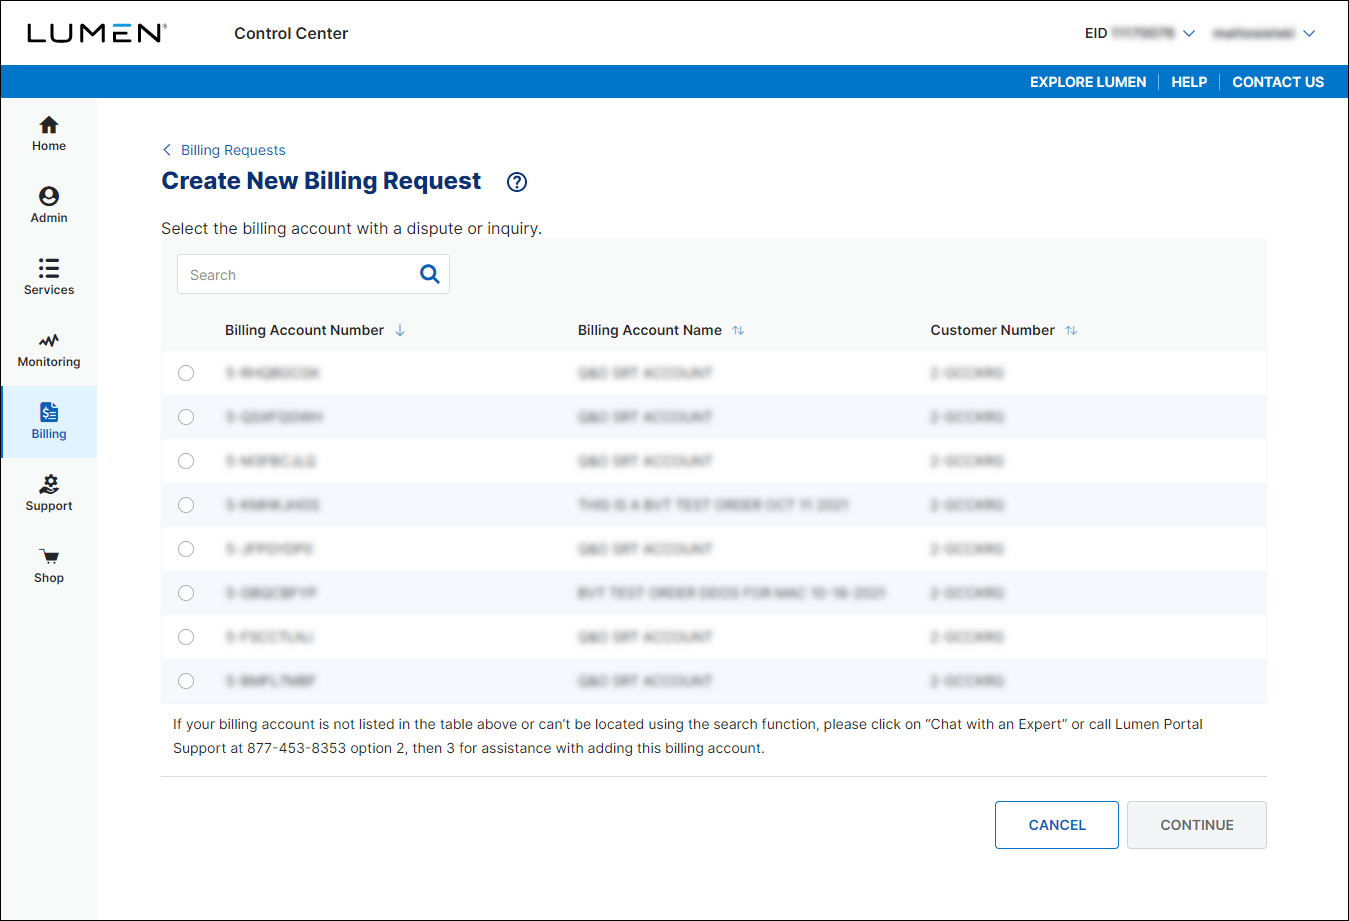 Create New Billing Request (showing billing accounts)